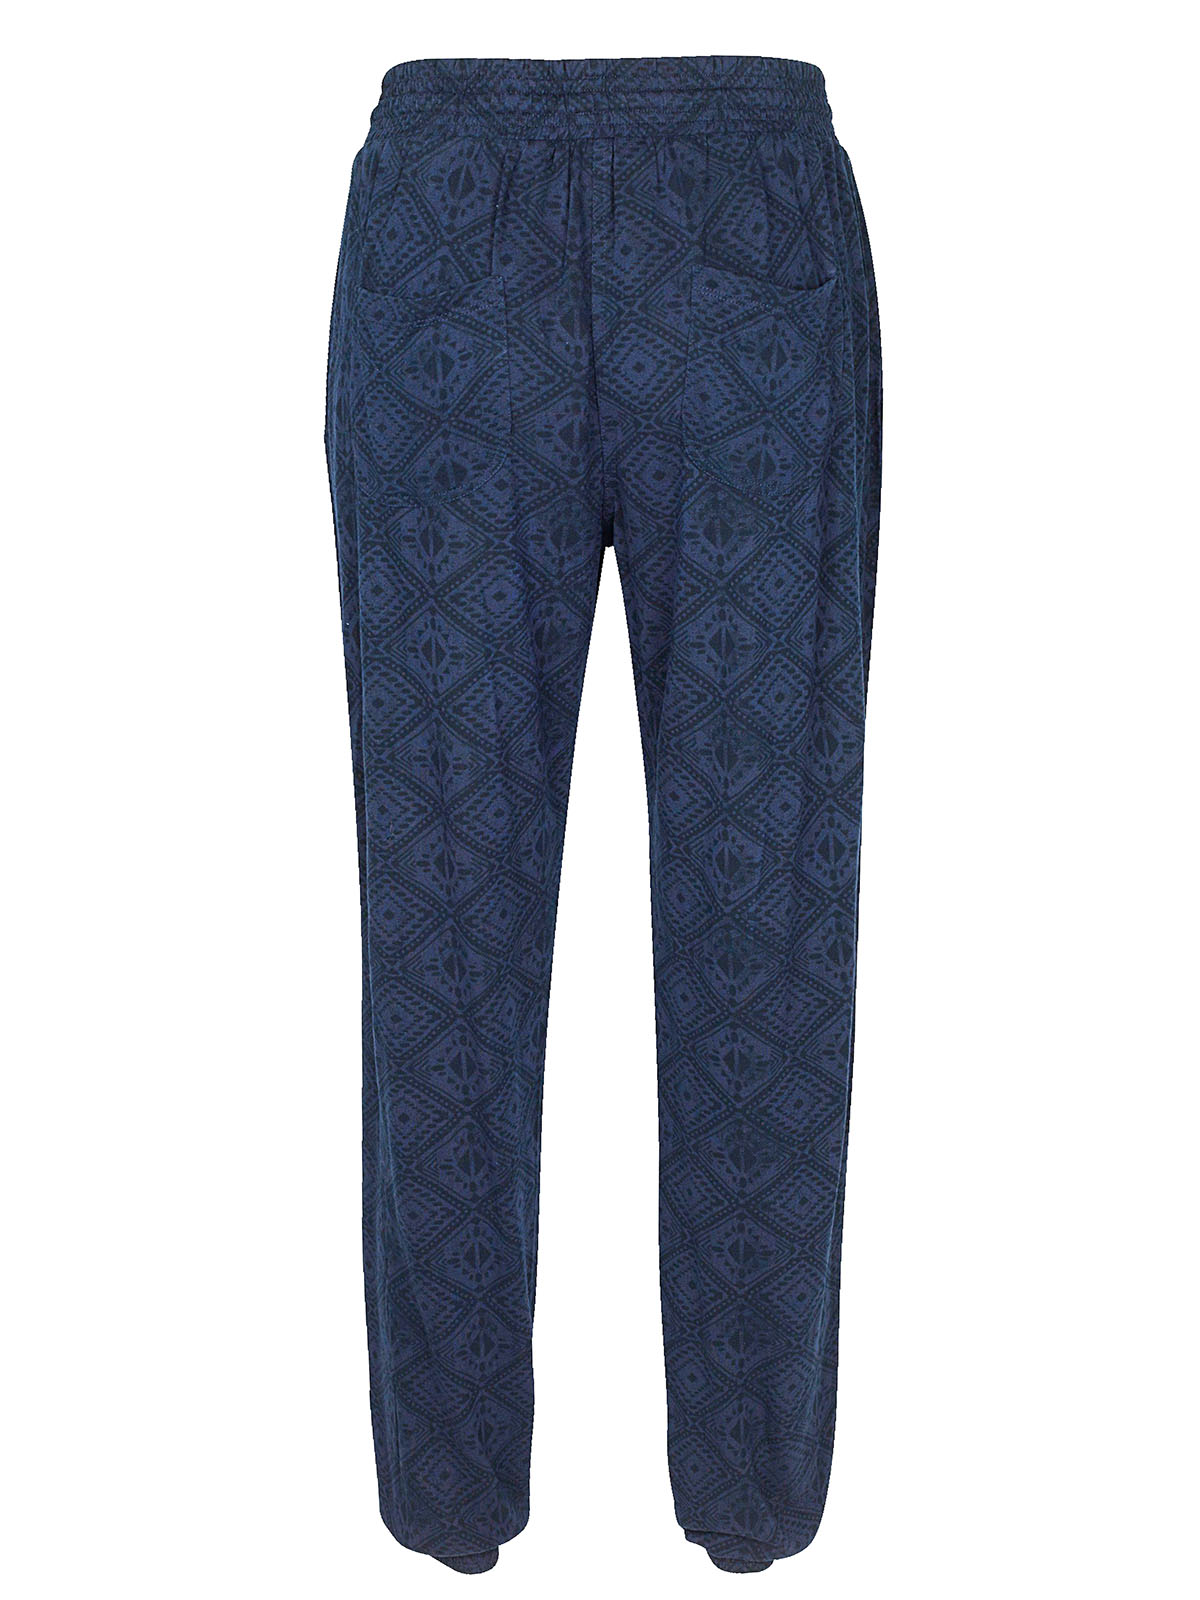 FAT FACE - - Fat Face NAVY Printed Cuffed Hem Joggers - Size 12 to 14